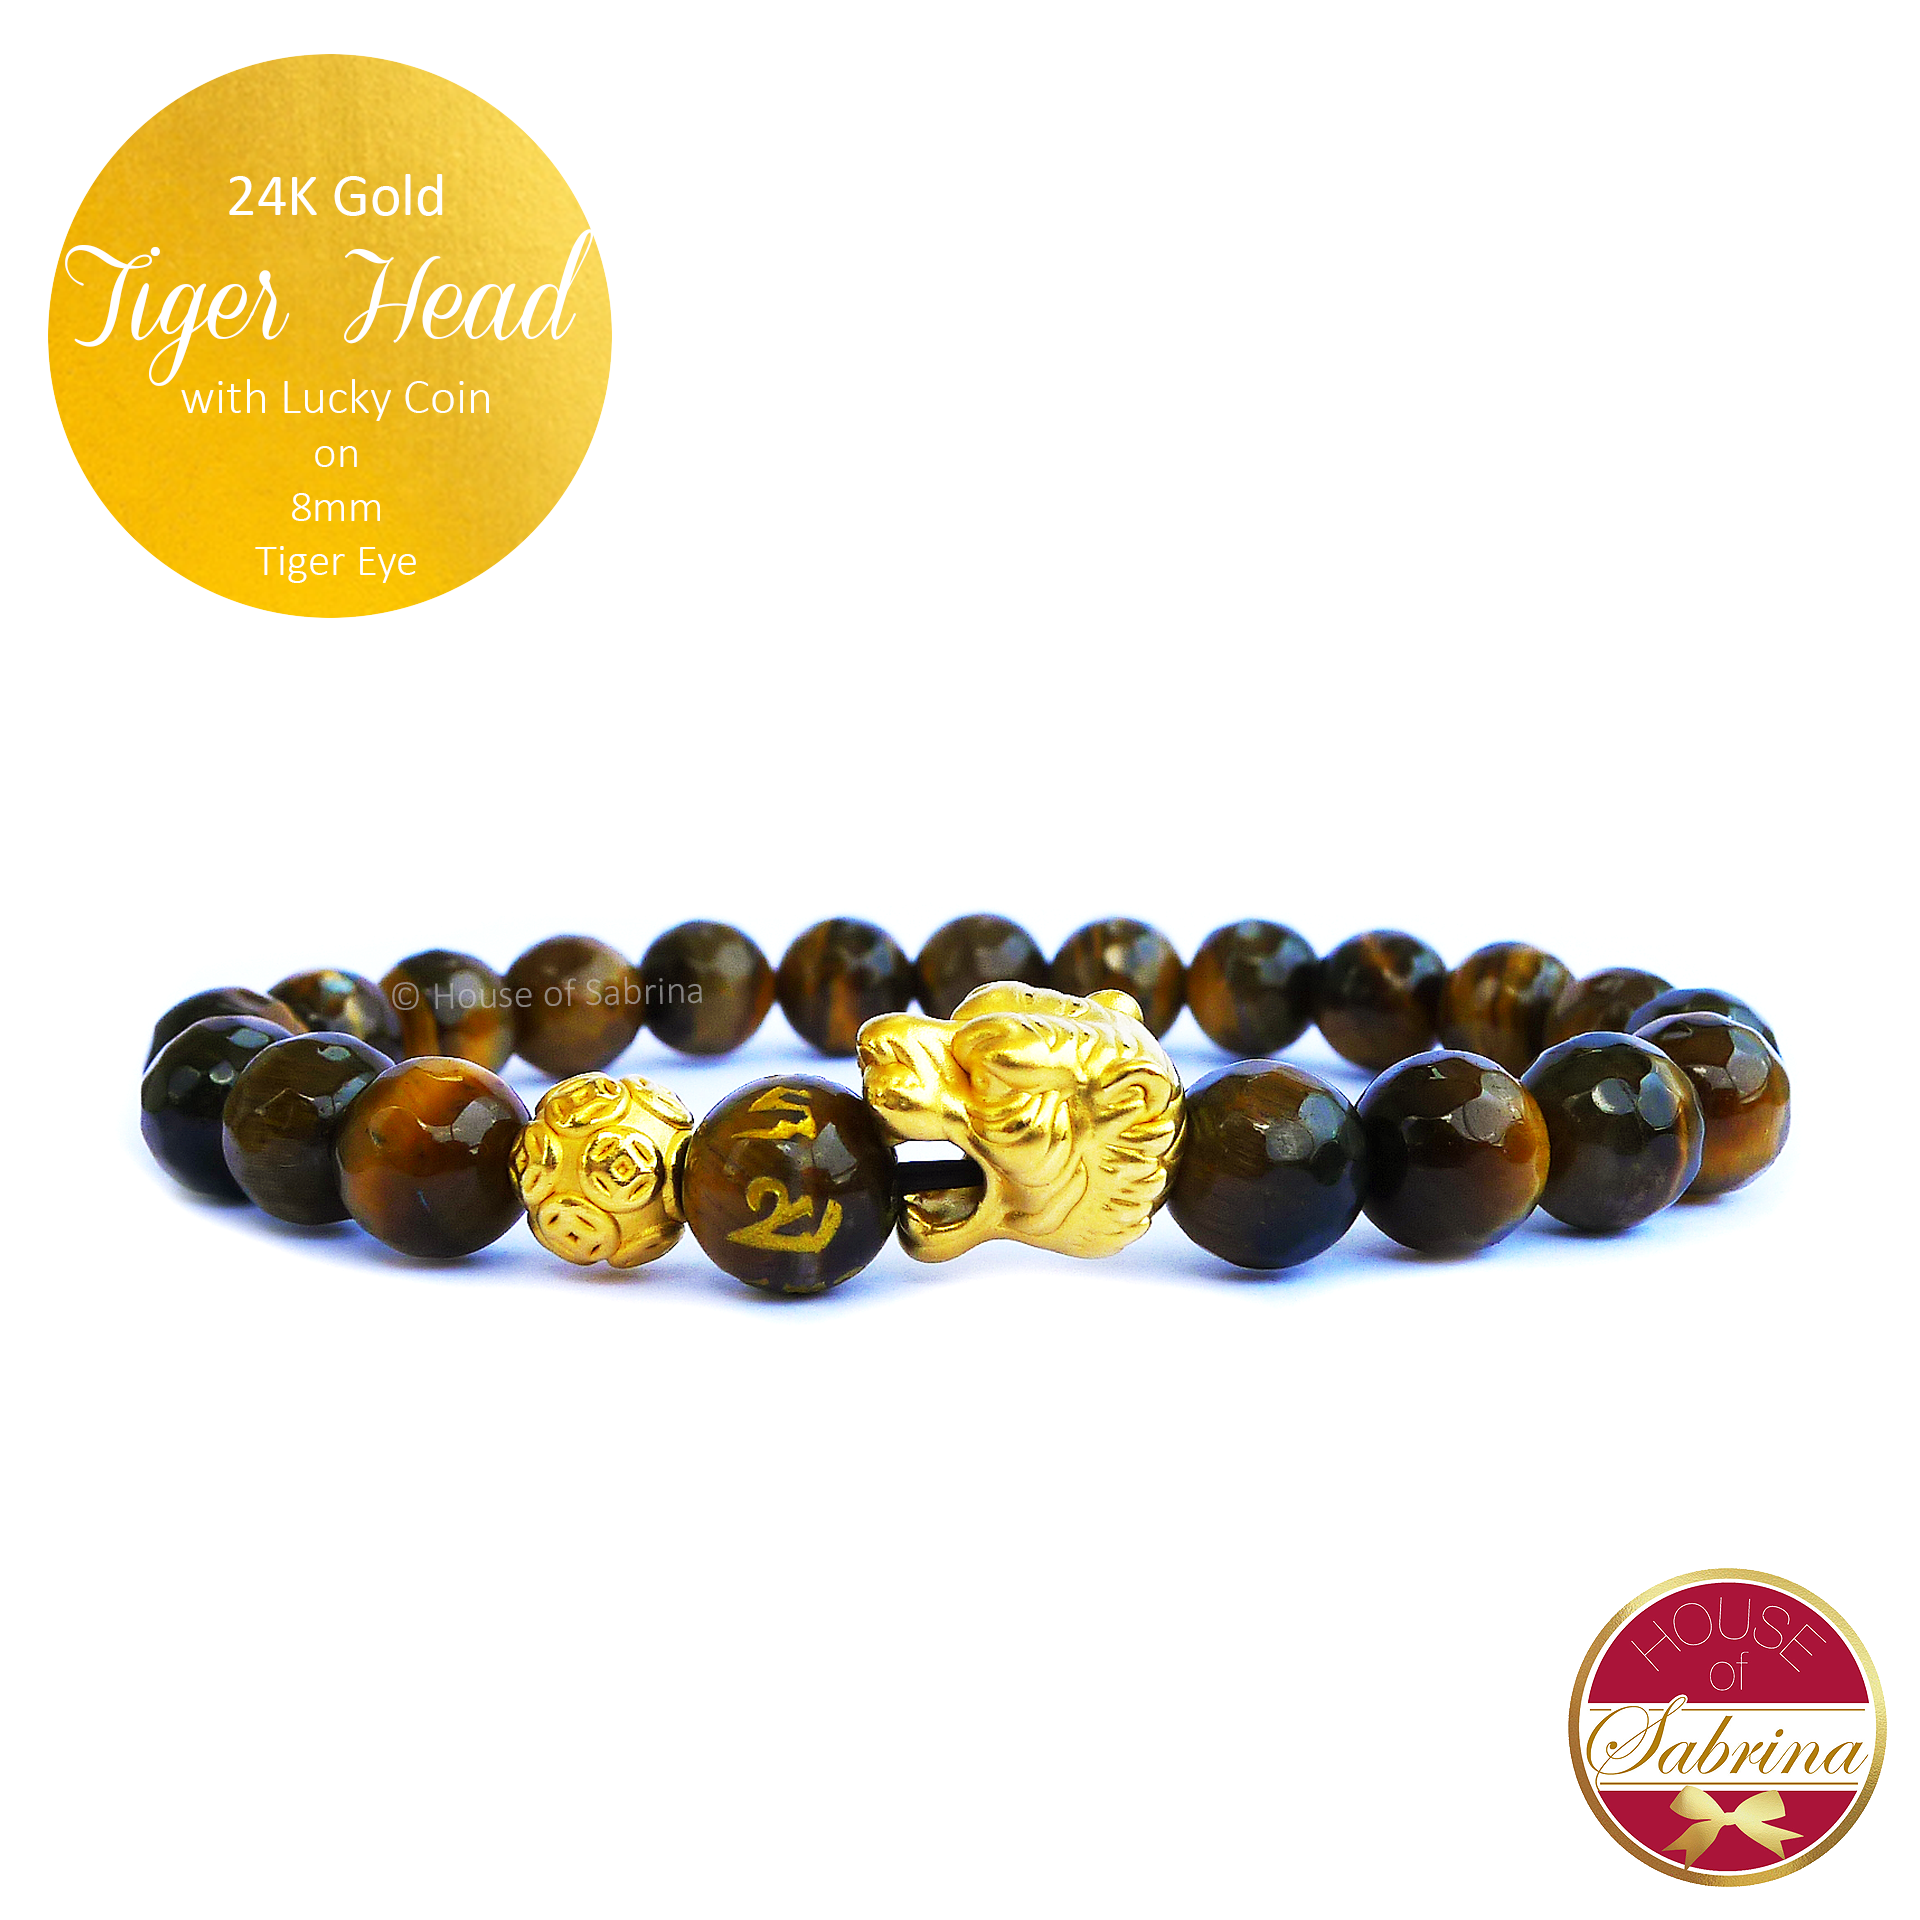 24K Gold Tiger Head with Lucky Coin on 8mm Tiger Eye Gemstone Bracelet